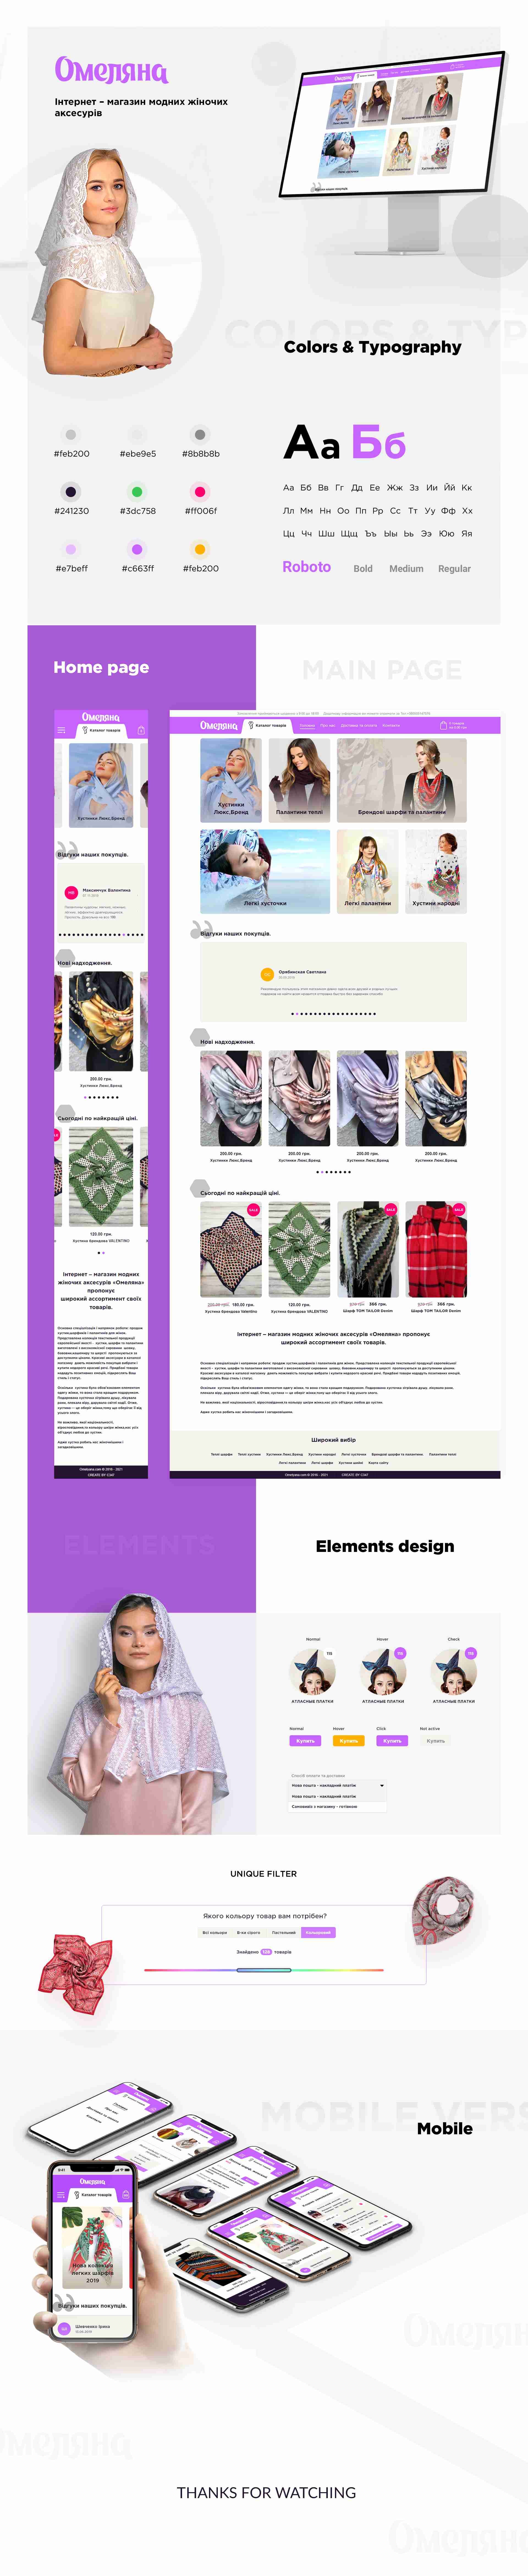 Online store of women's scarves with a unique filter